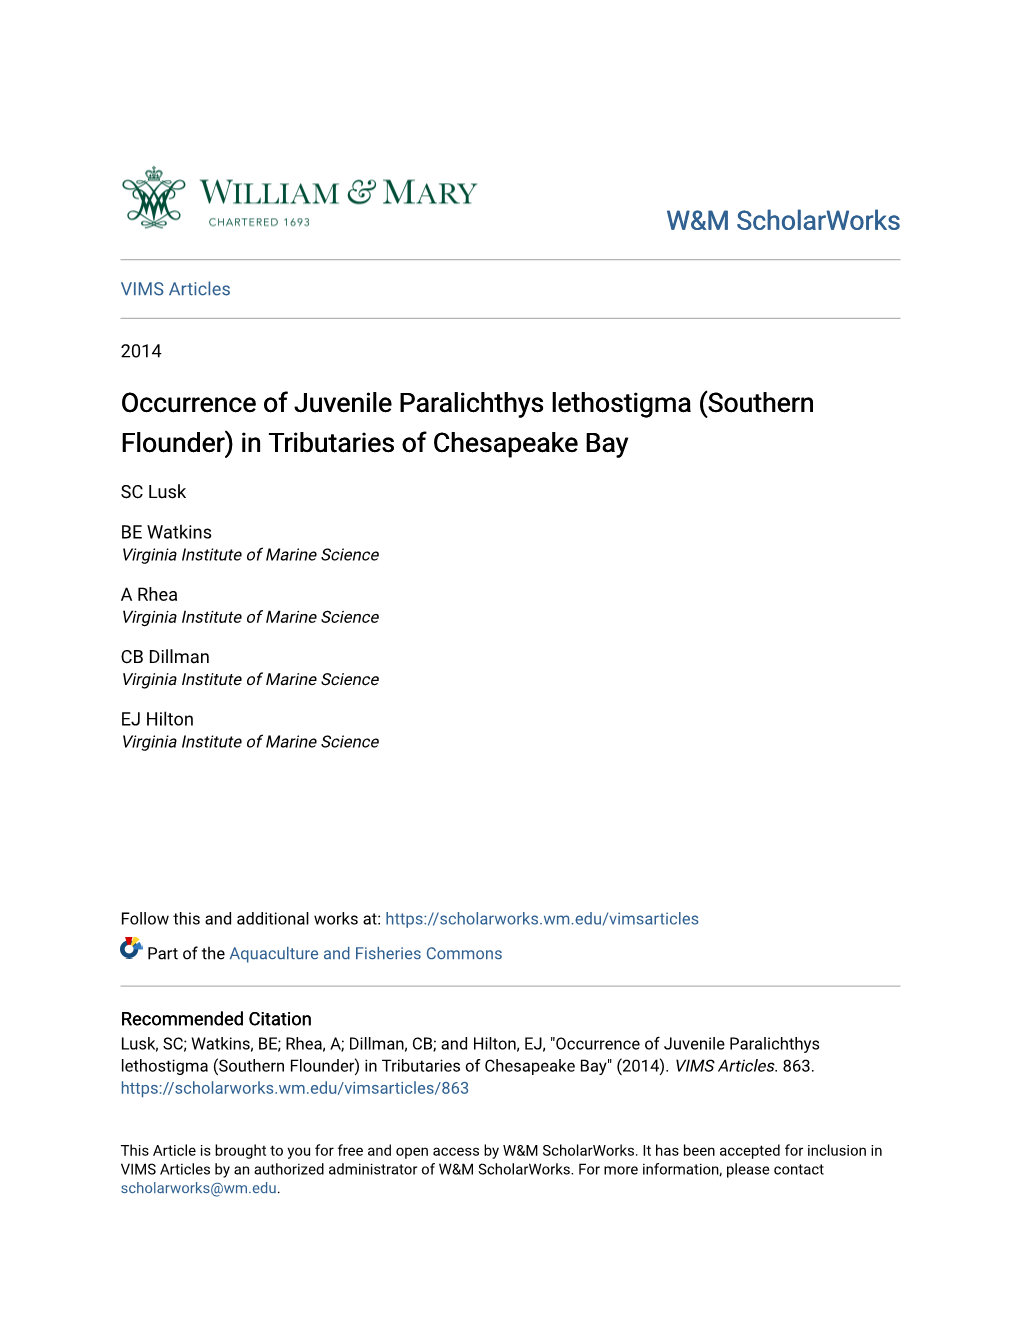 Occurrence of Juvenile Paralichthys Lethostigma (Southern Flounder) in Tributaries of Chesapeake Bay